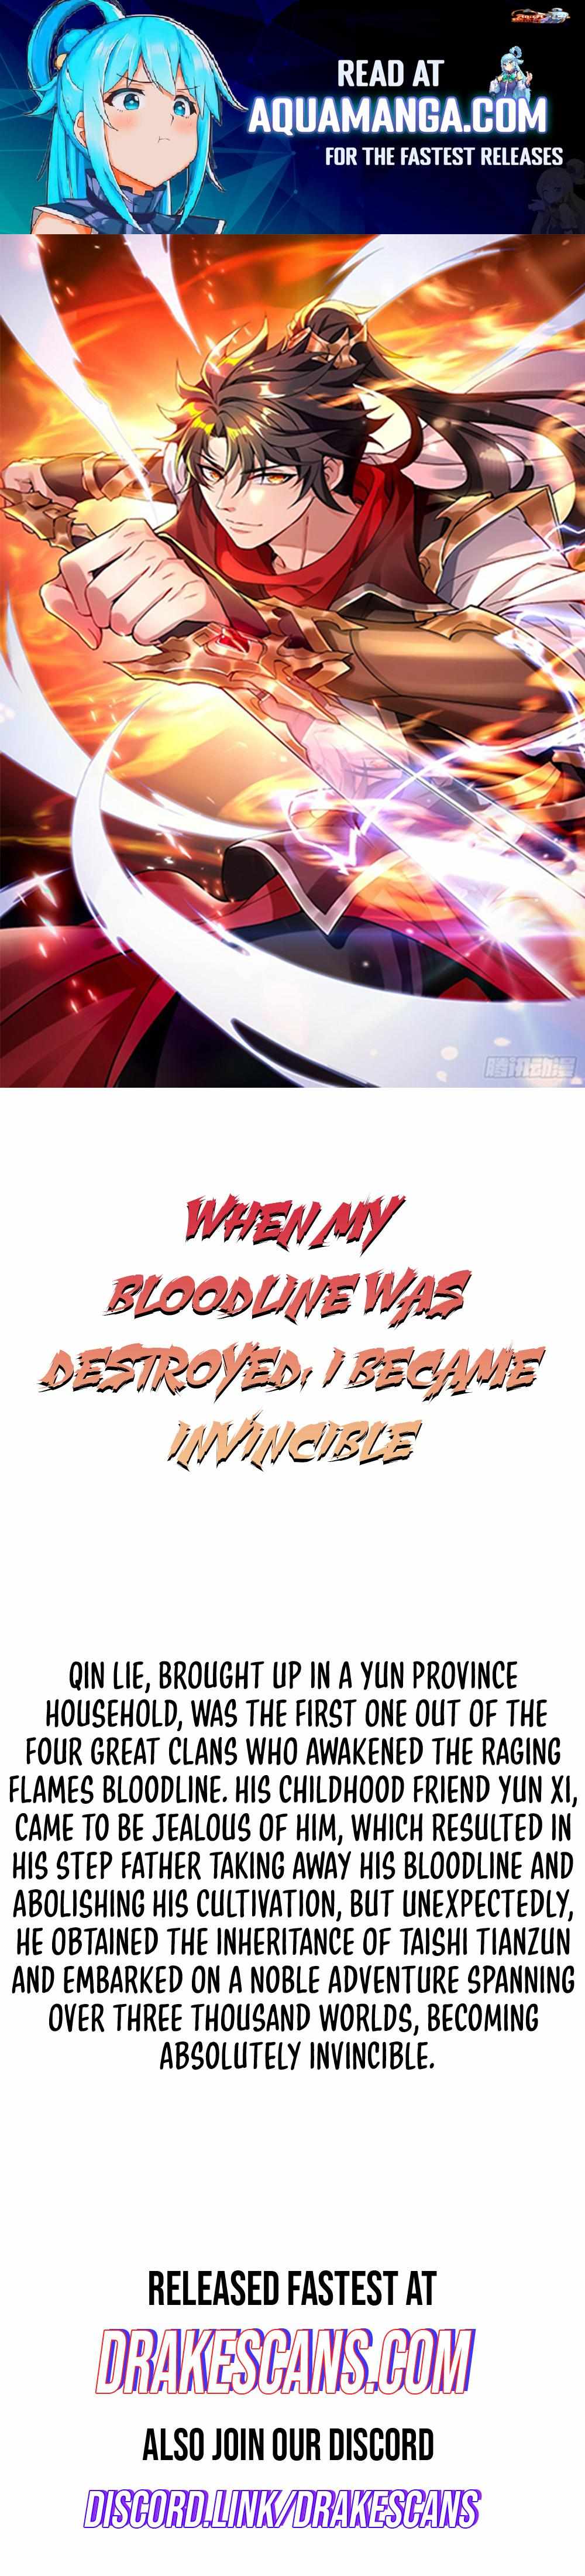 When My Bloodline Was Destroyed, I Became Invincible - Page 2